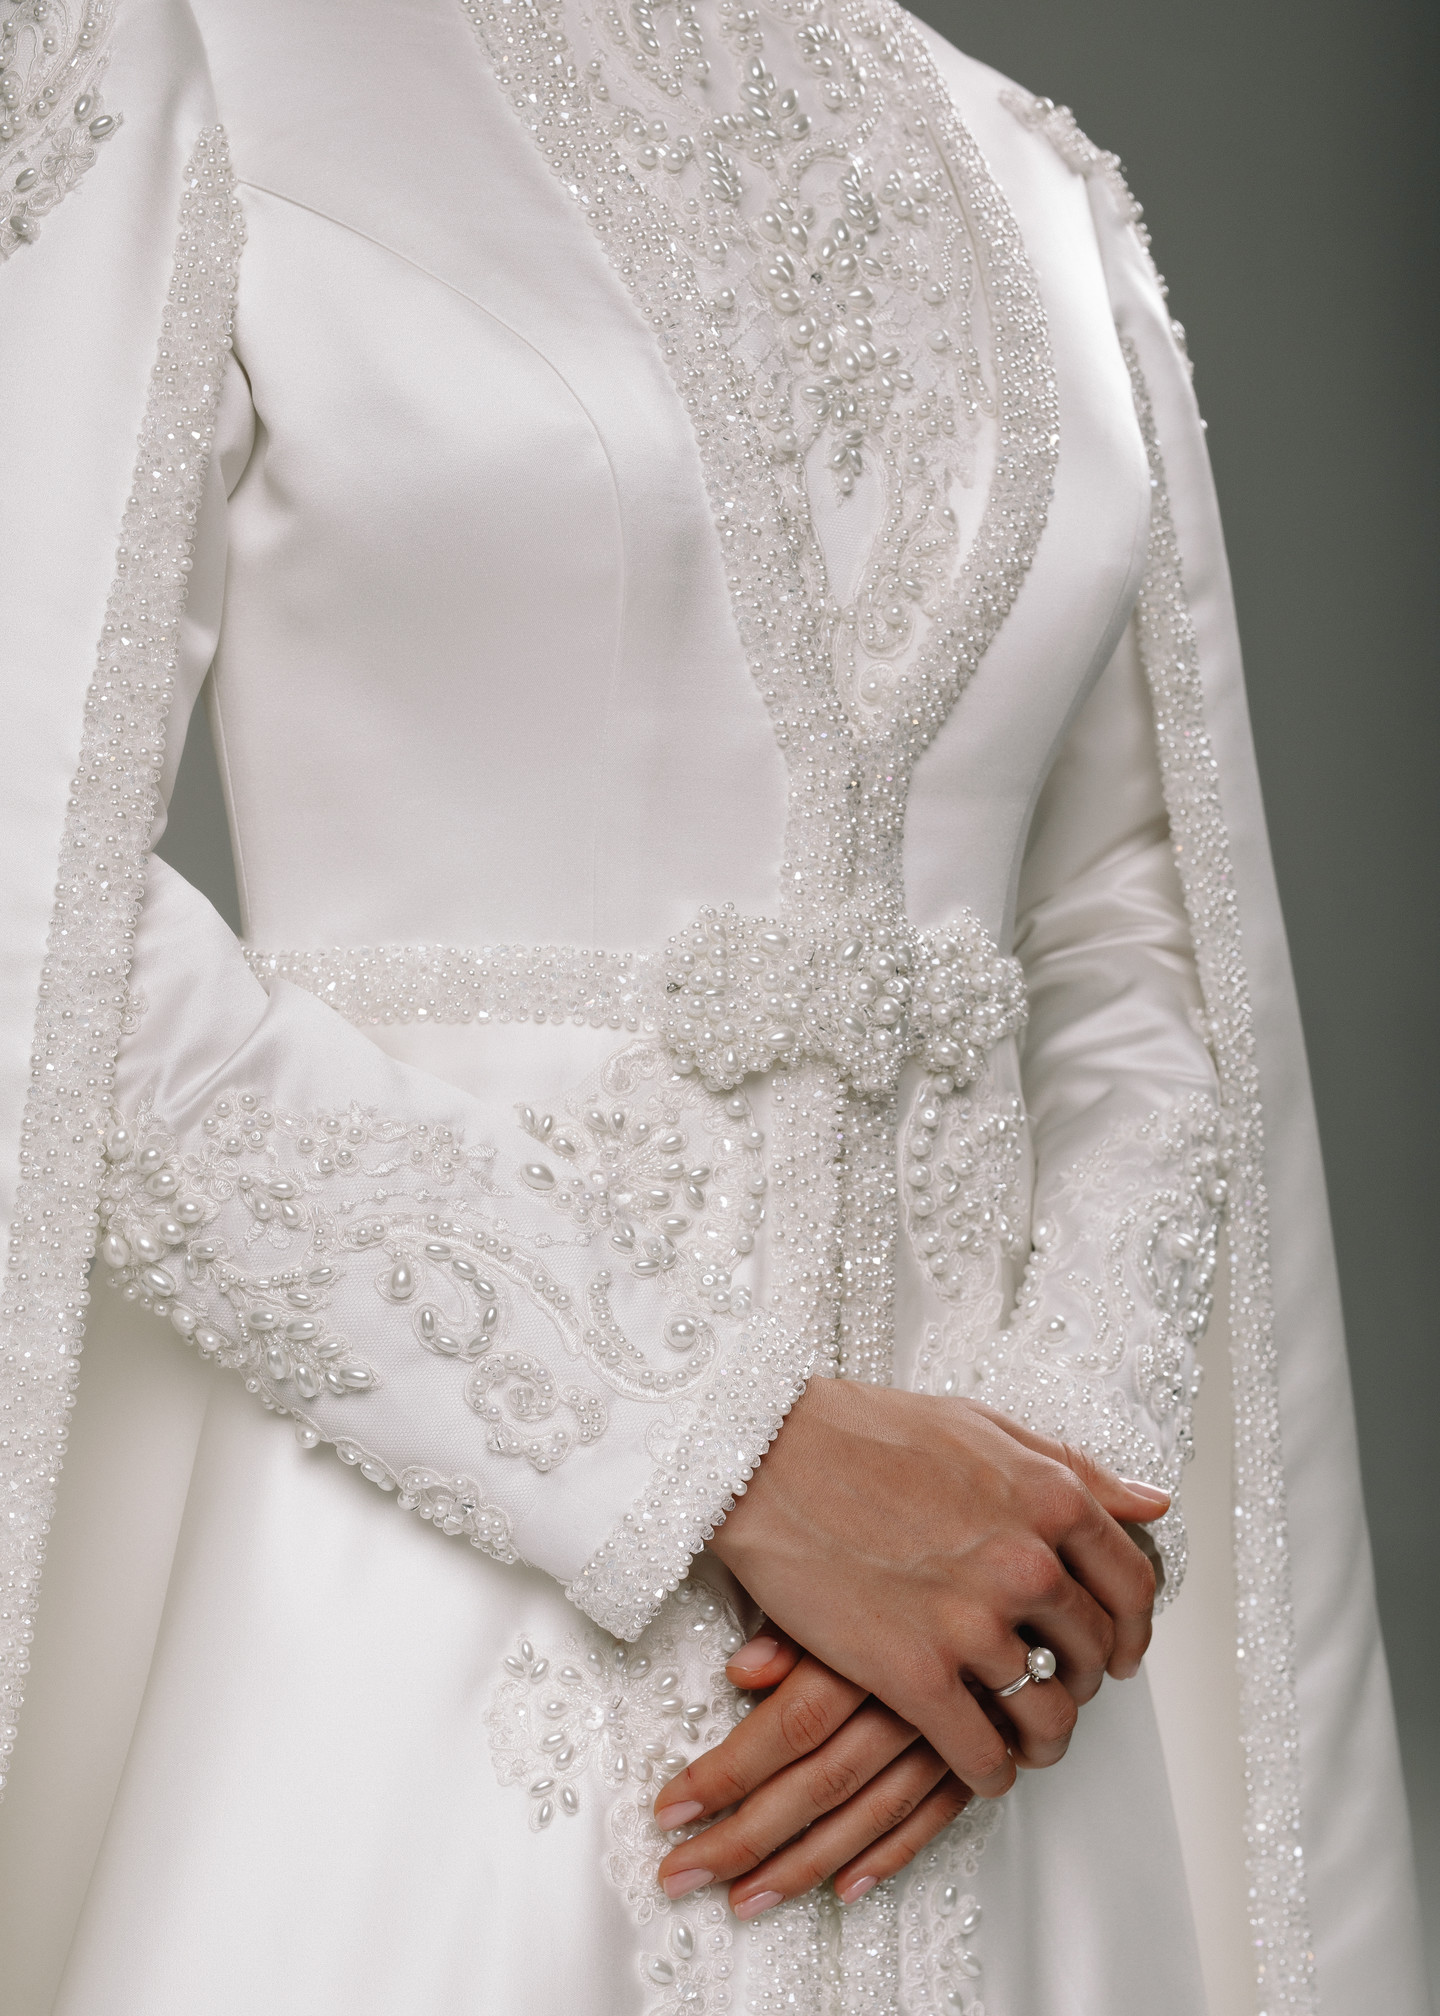 Roxana gown, 2020, couture, dress, bridal, off-white, lace, Roxana, embroidery, A-line, sleeves, train, satin, archive